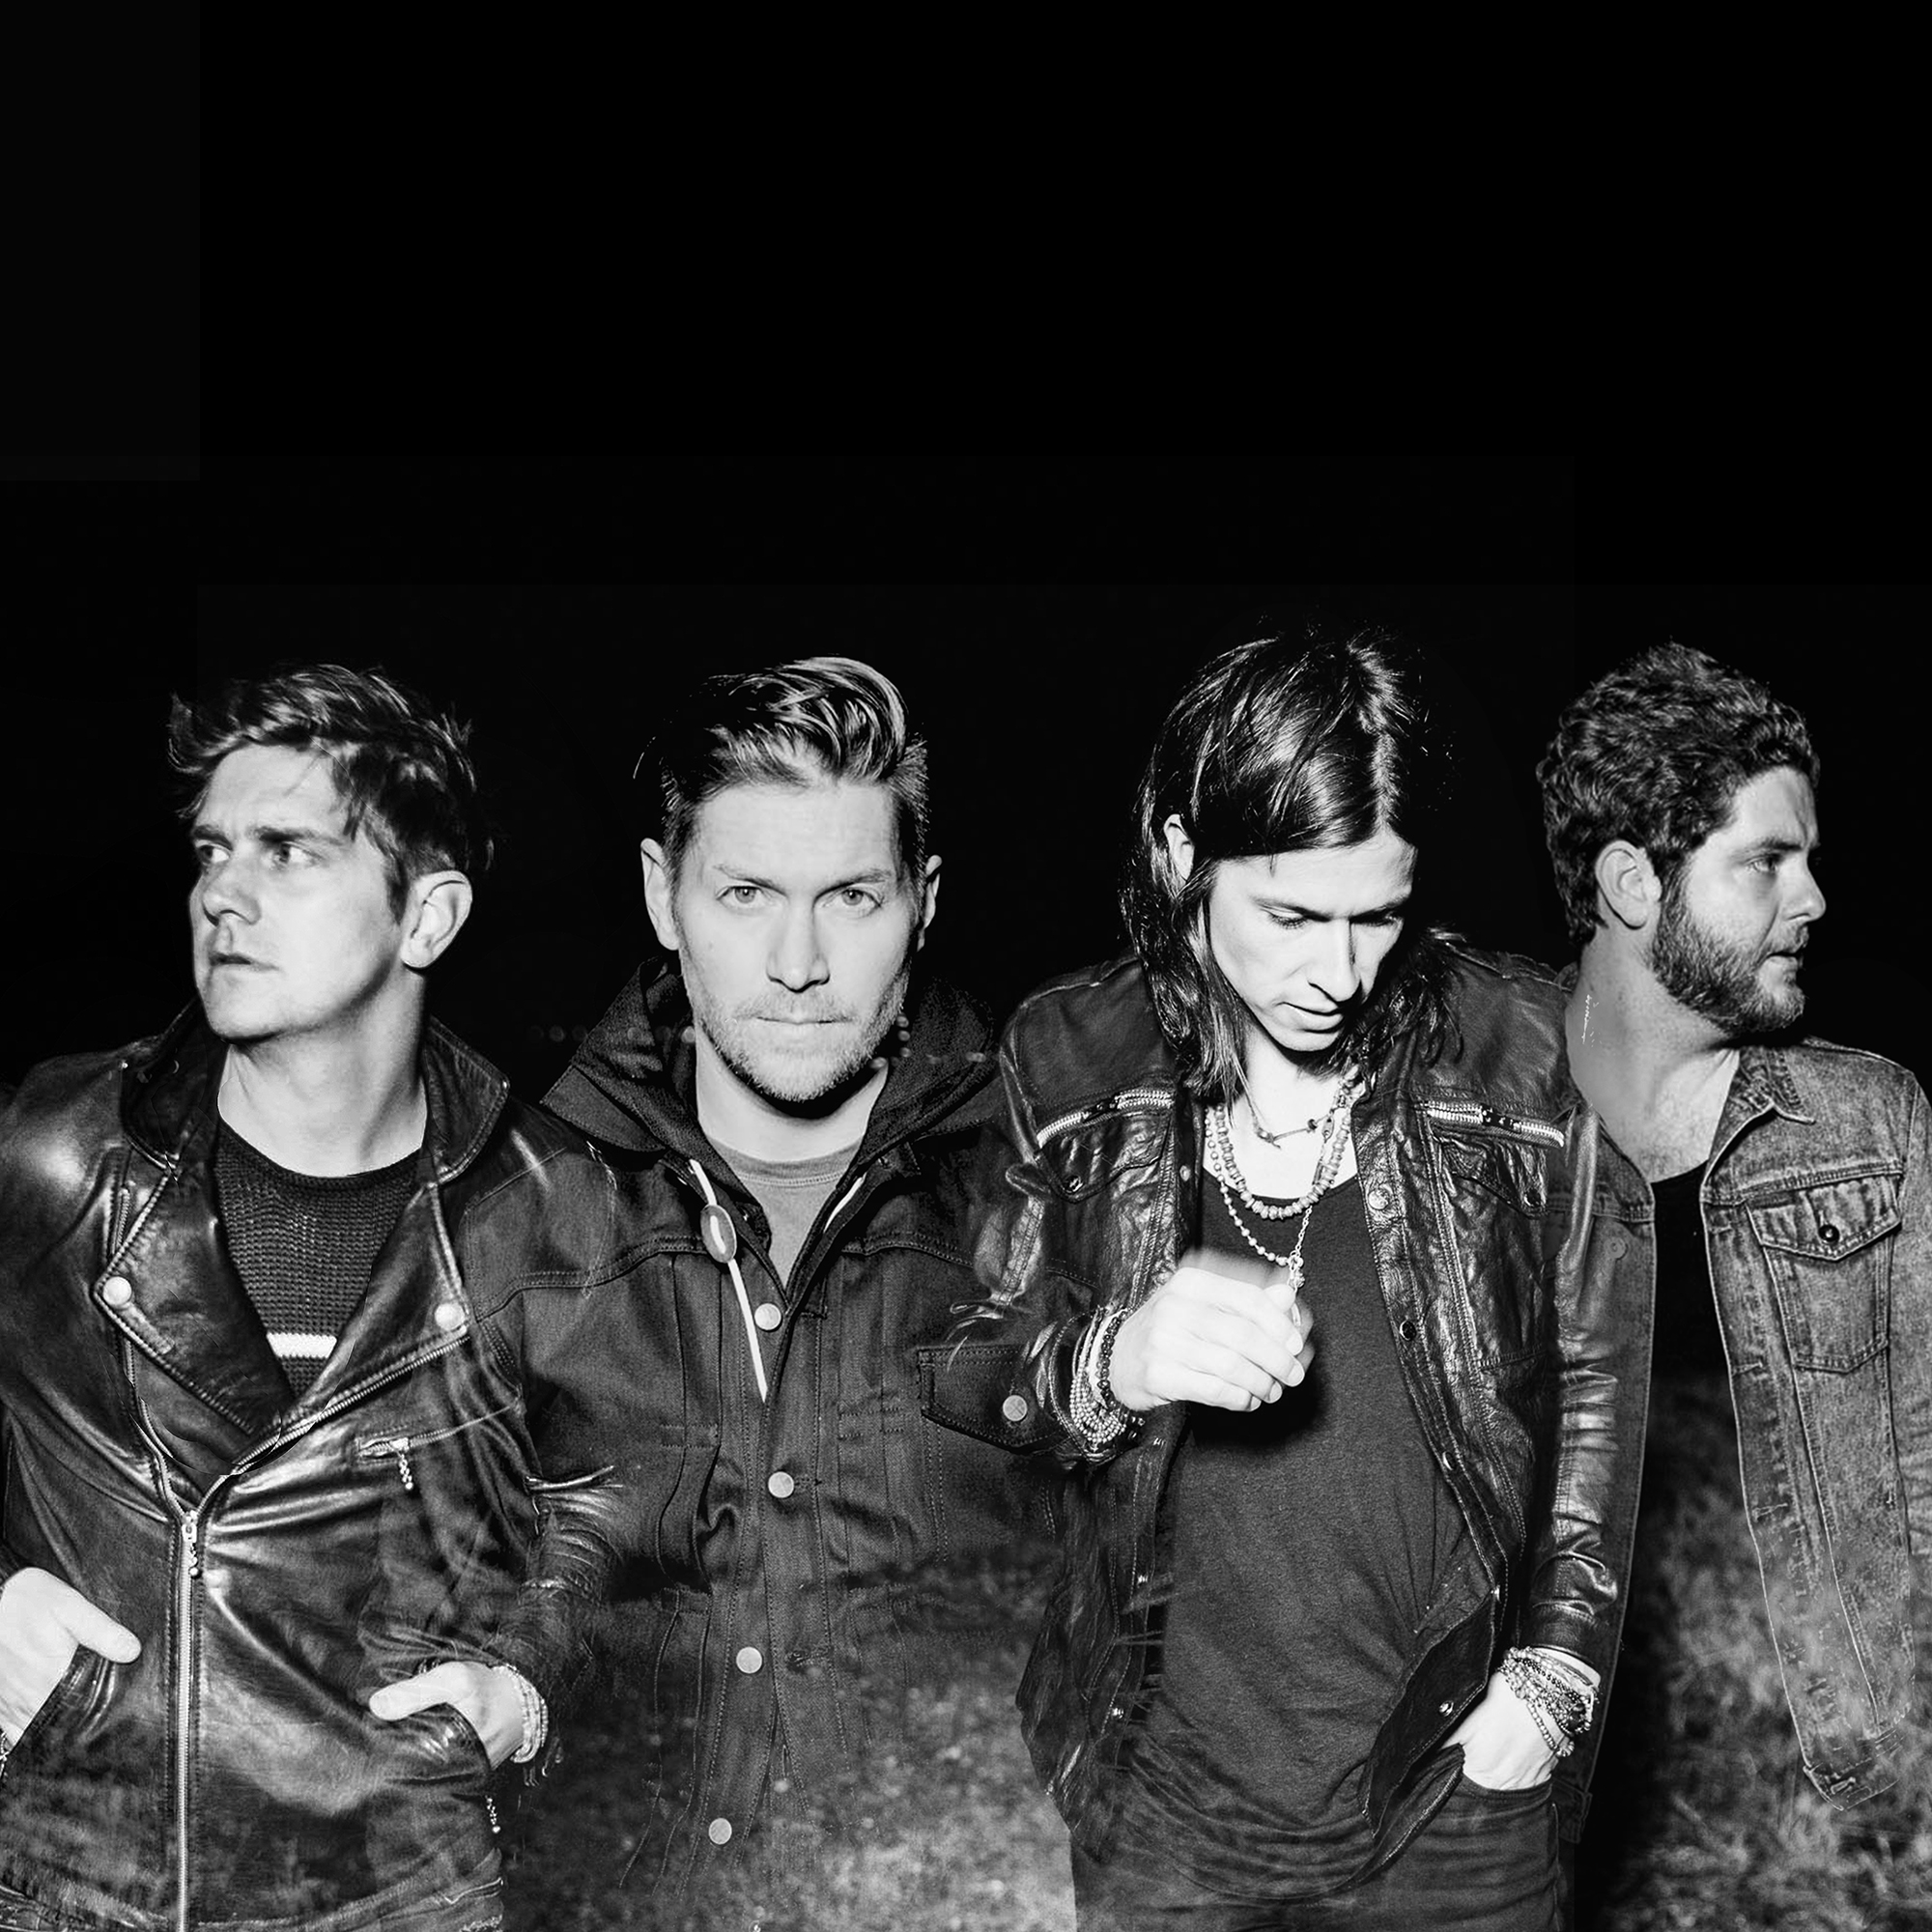 Concert Preview NEEDTOBREATHE at Marymoor on 09.01.16 Seattle Music News